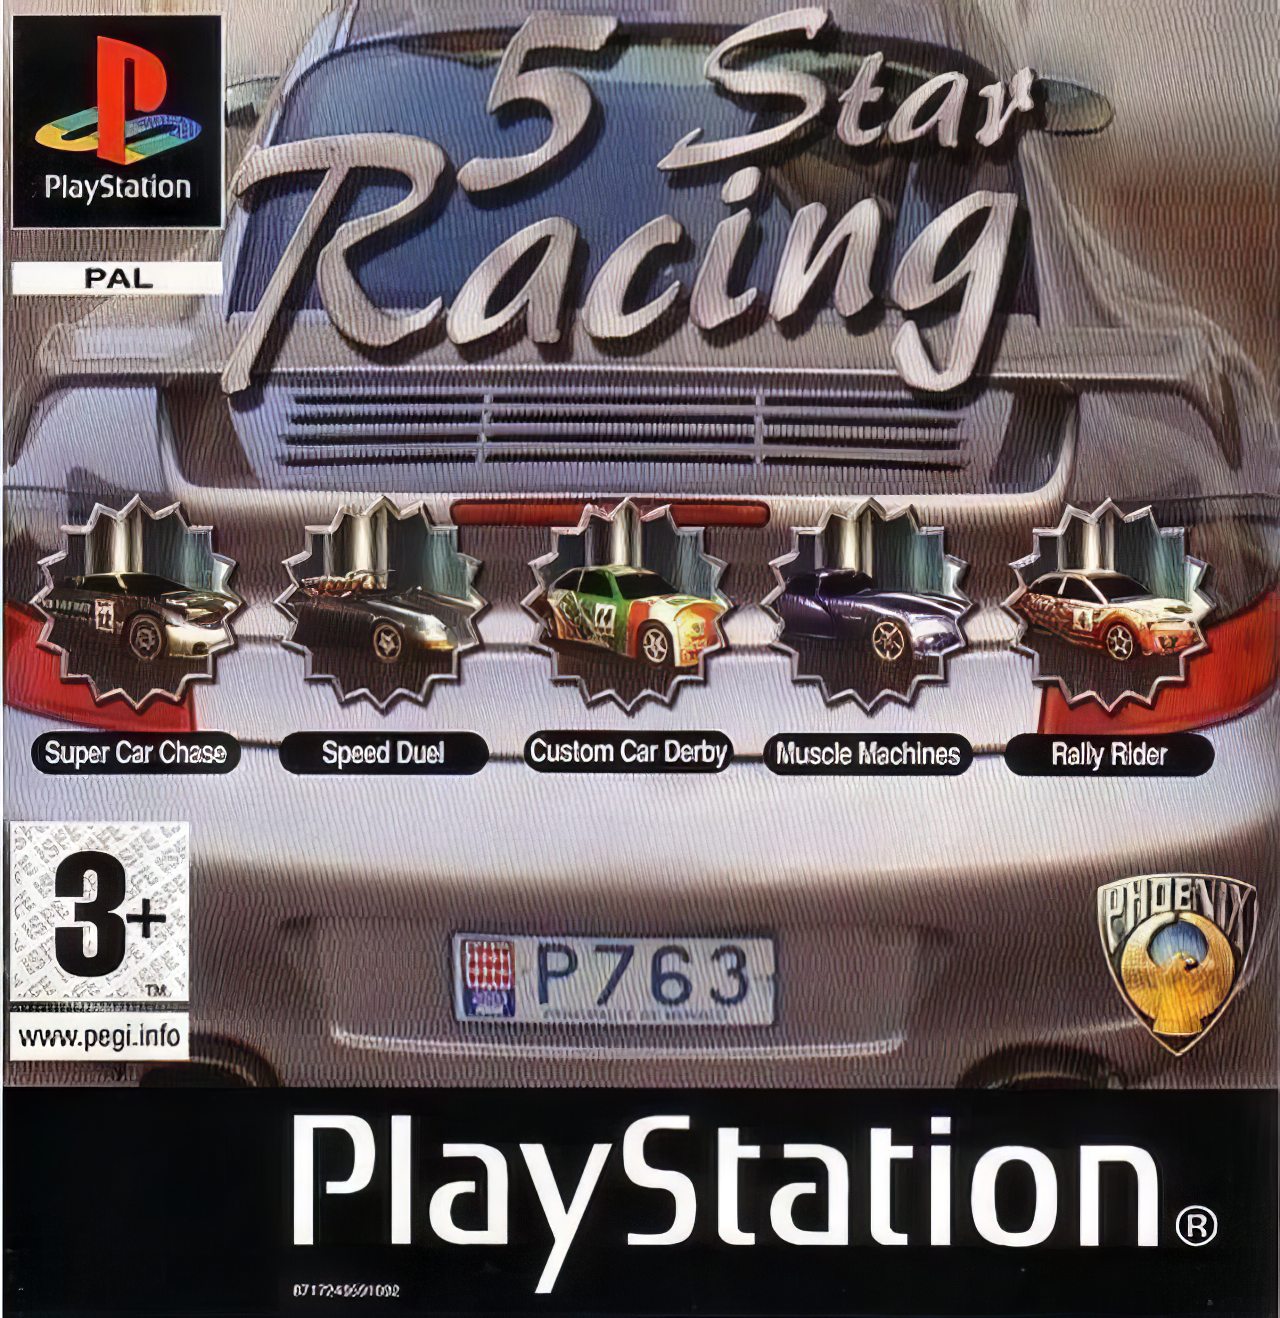 5 Star Racing for Playstation 1